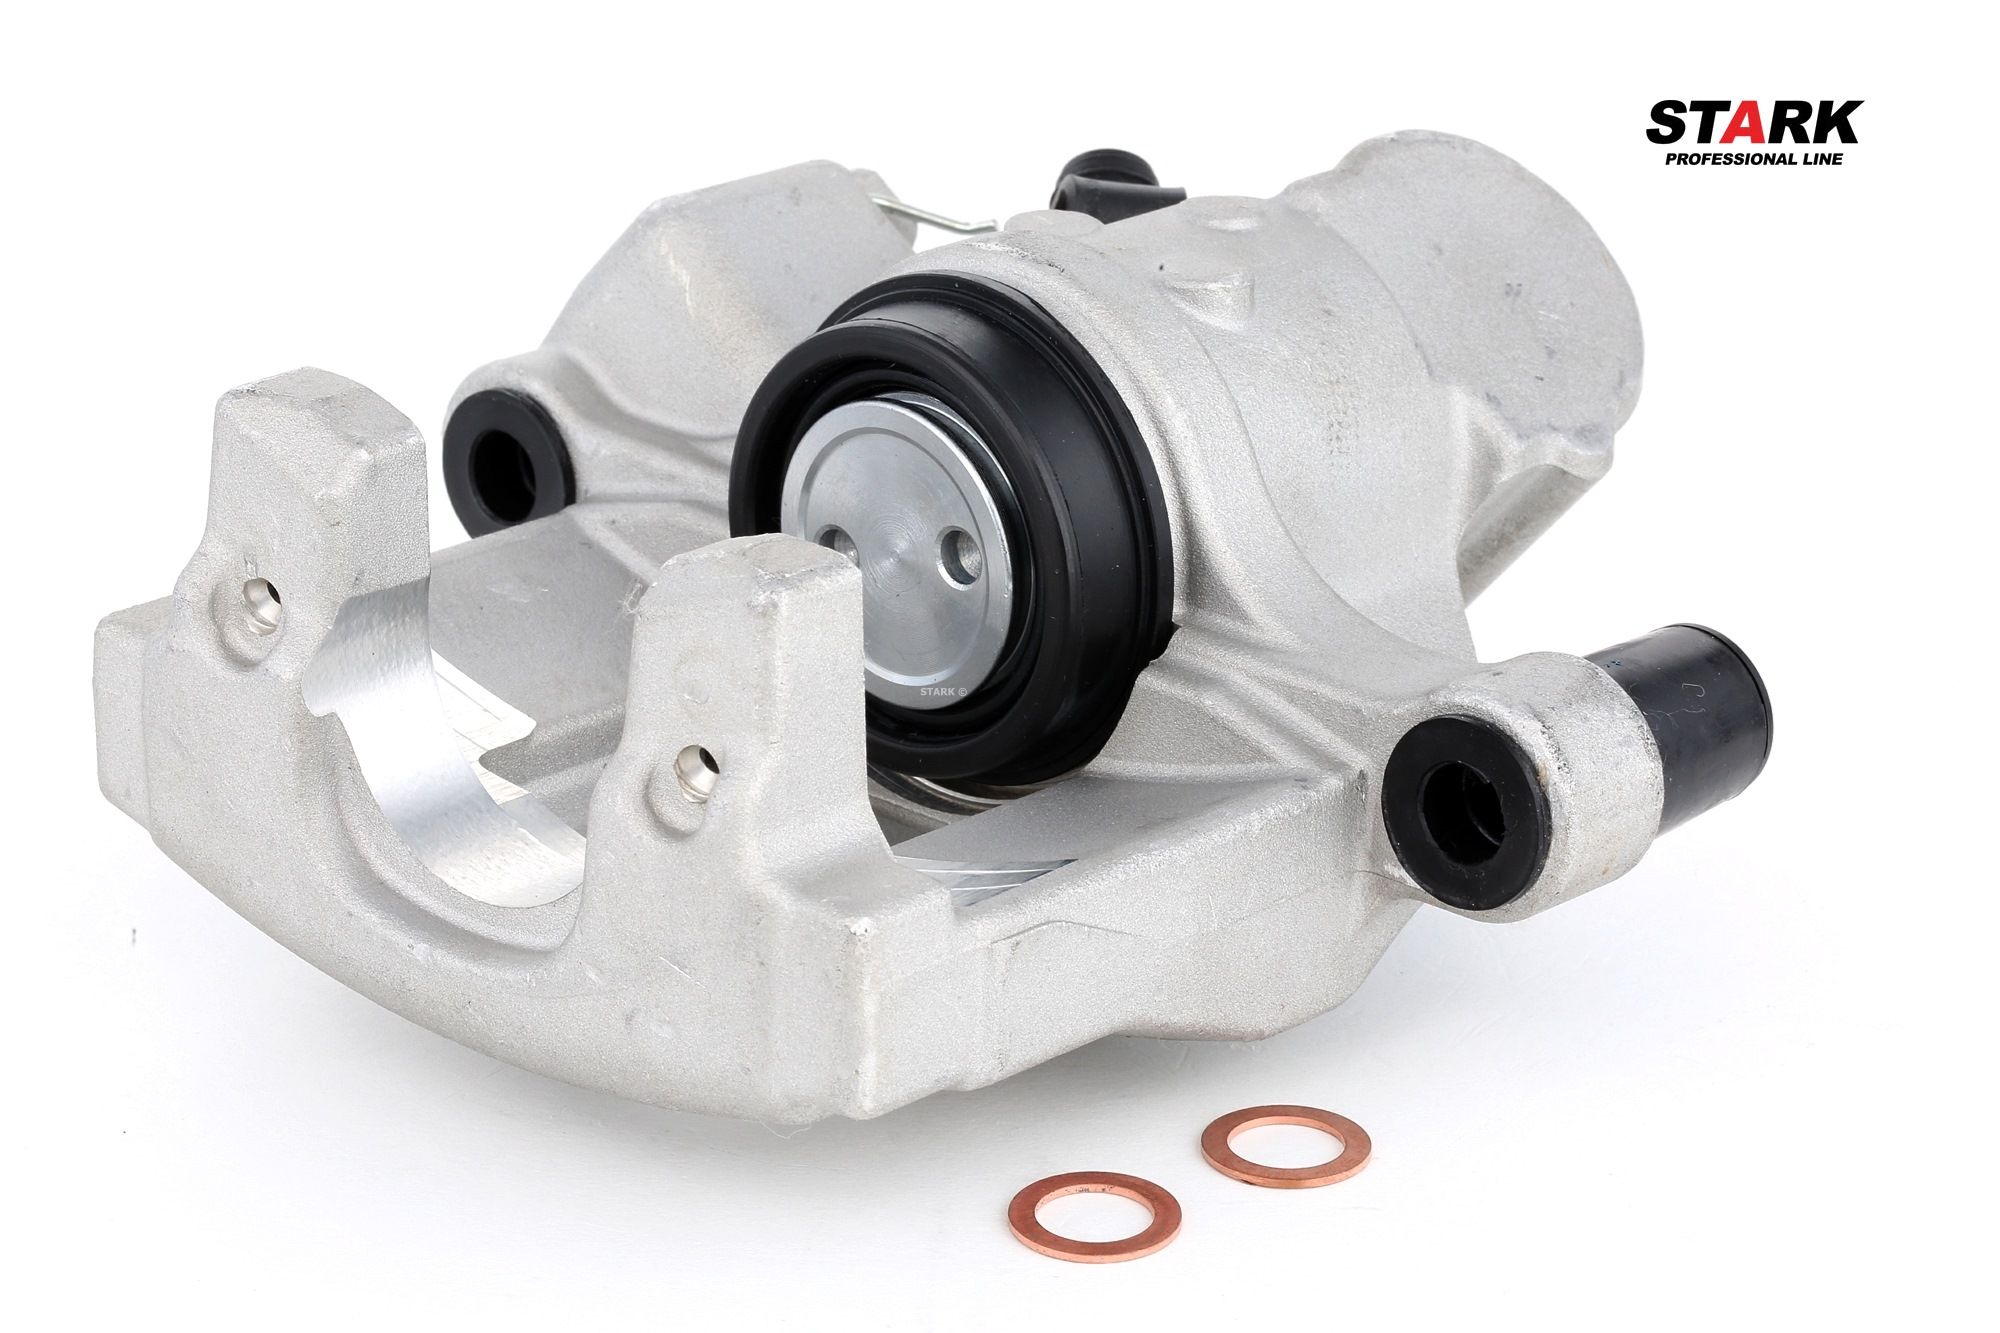 STARK SKBC-0460388 Brake caliper Aluminium, 144mm, Rear Axle Right, behind the axle, without holder, for vehicles without sports package